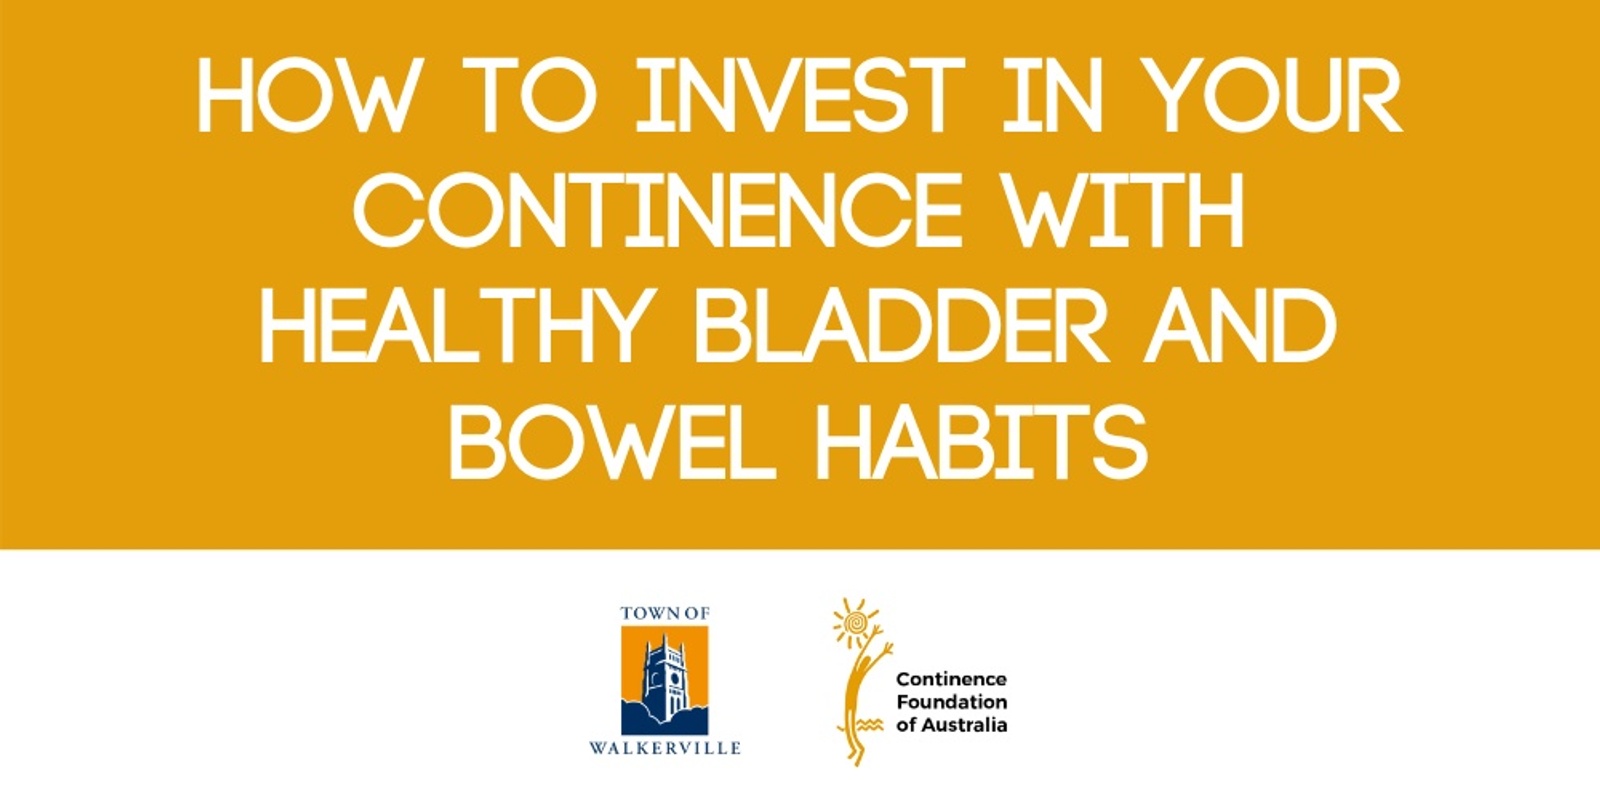 Banner image for How to invest in your continence - with healthy bladder and bowel habits